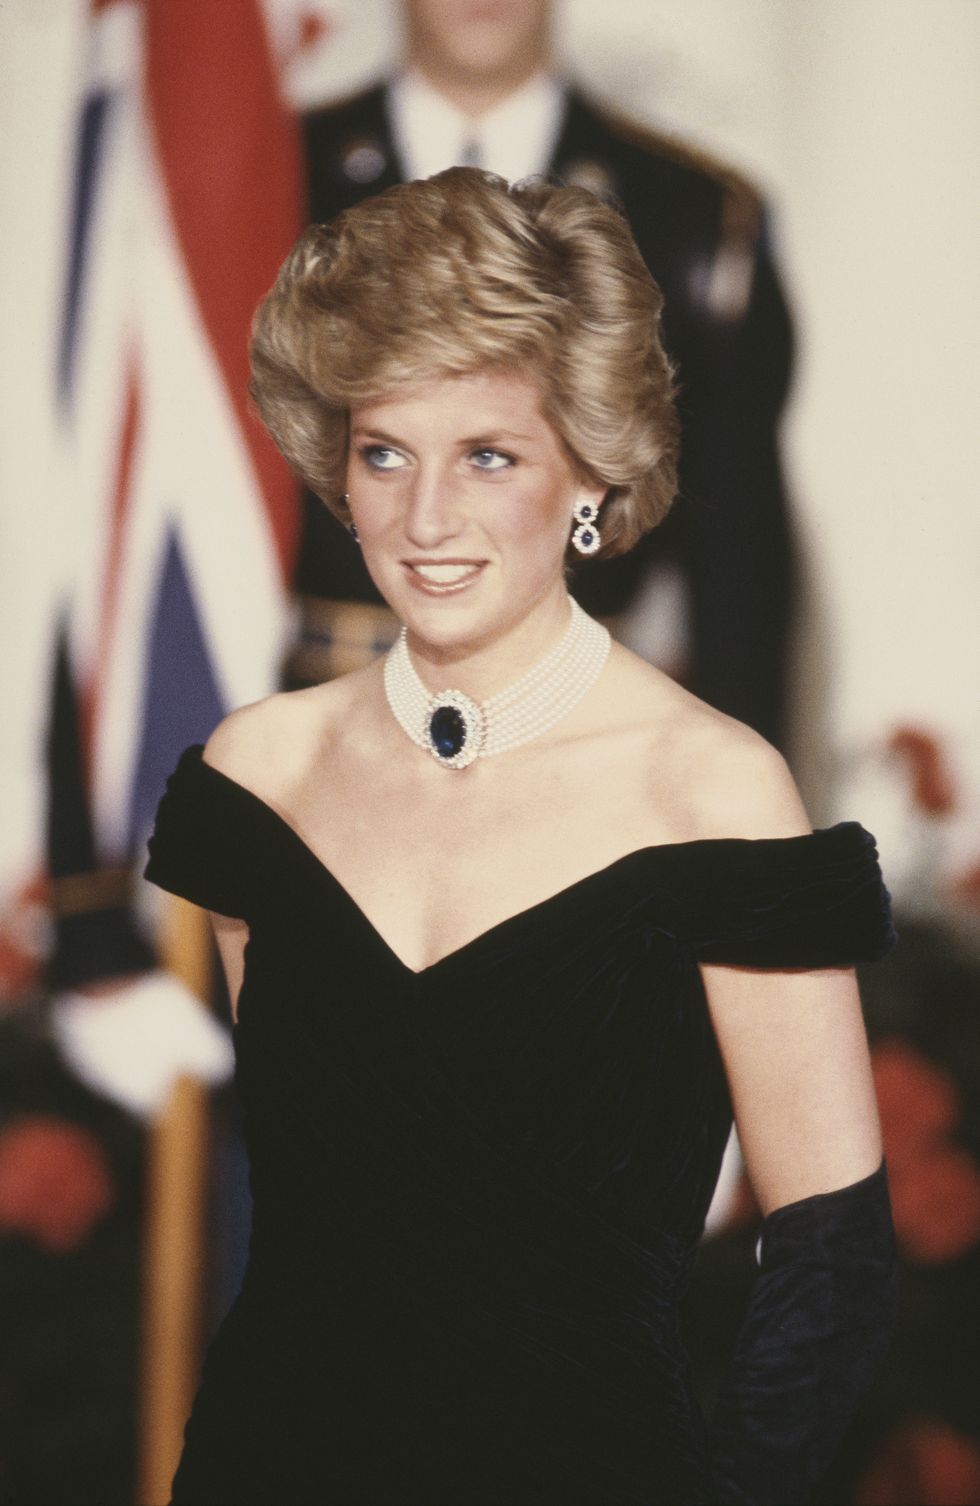 diana, princess of wales 1961 1997 wearing a black evening gown by victor edelstein during a ball hosted by ronald and nancy reagan at the white house in washington, dc, november 1985 photo by terry fincherprincess diana archivegetty images